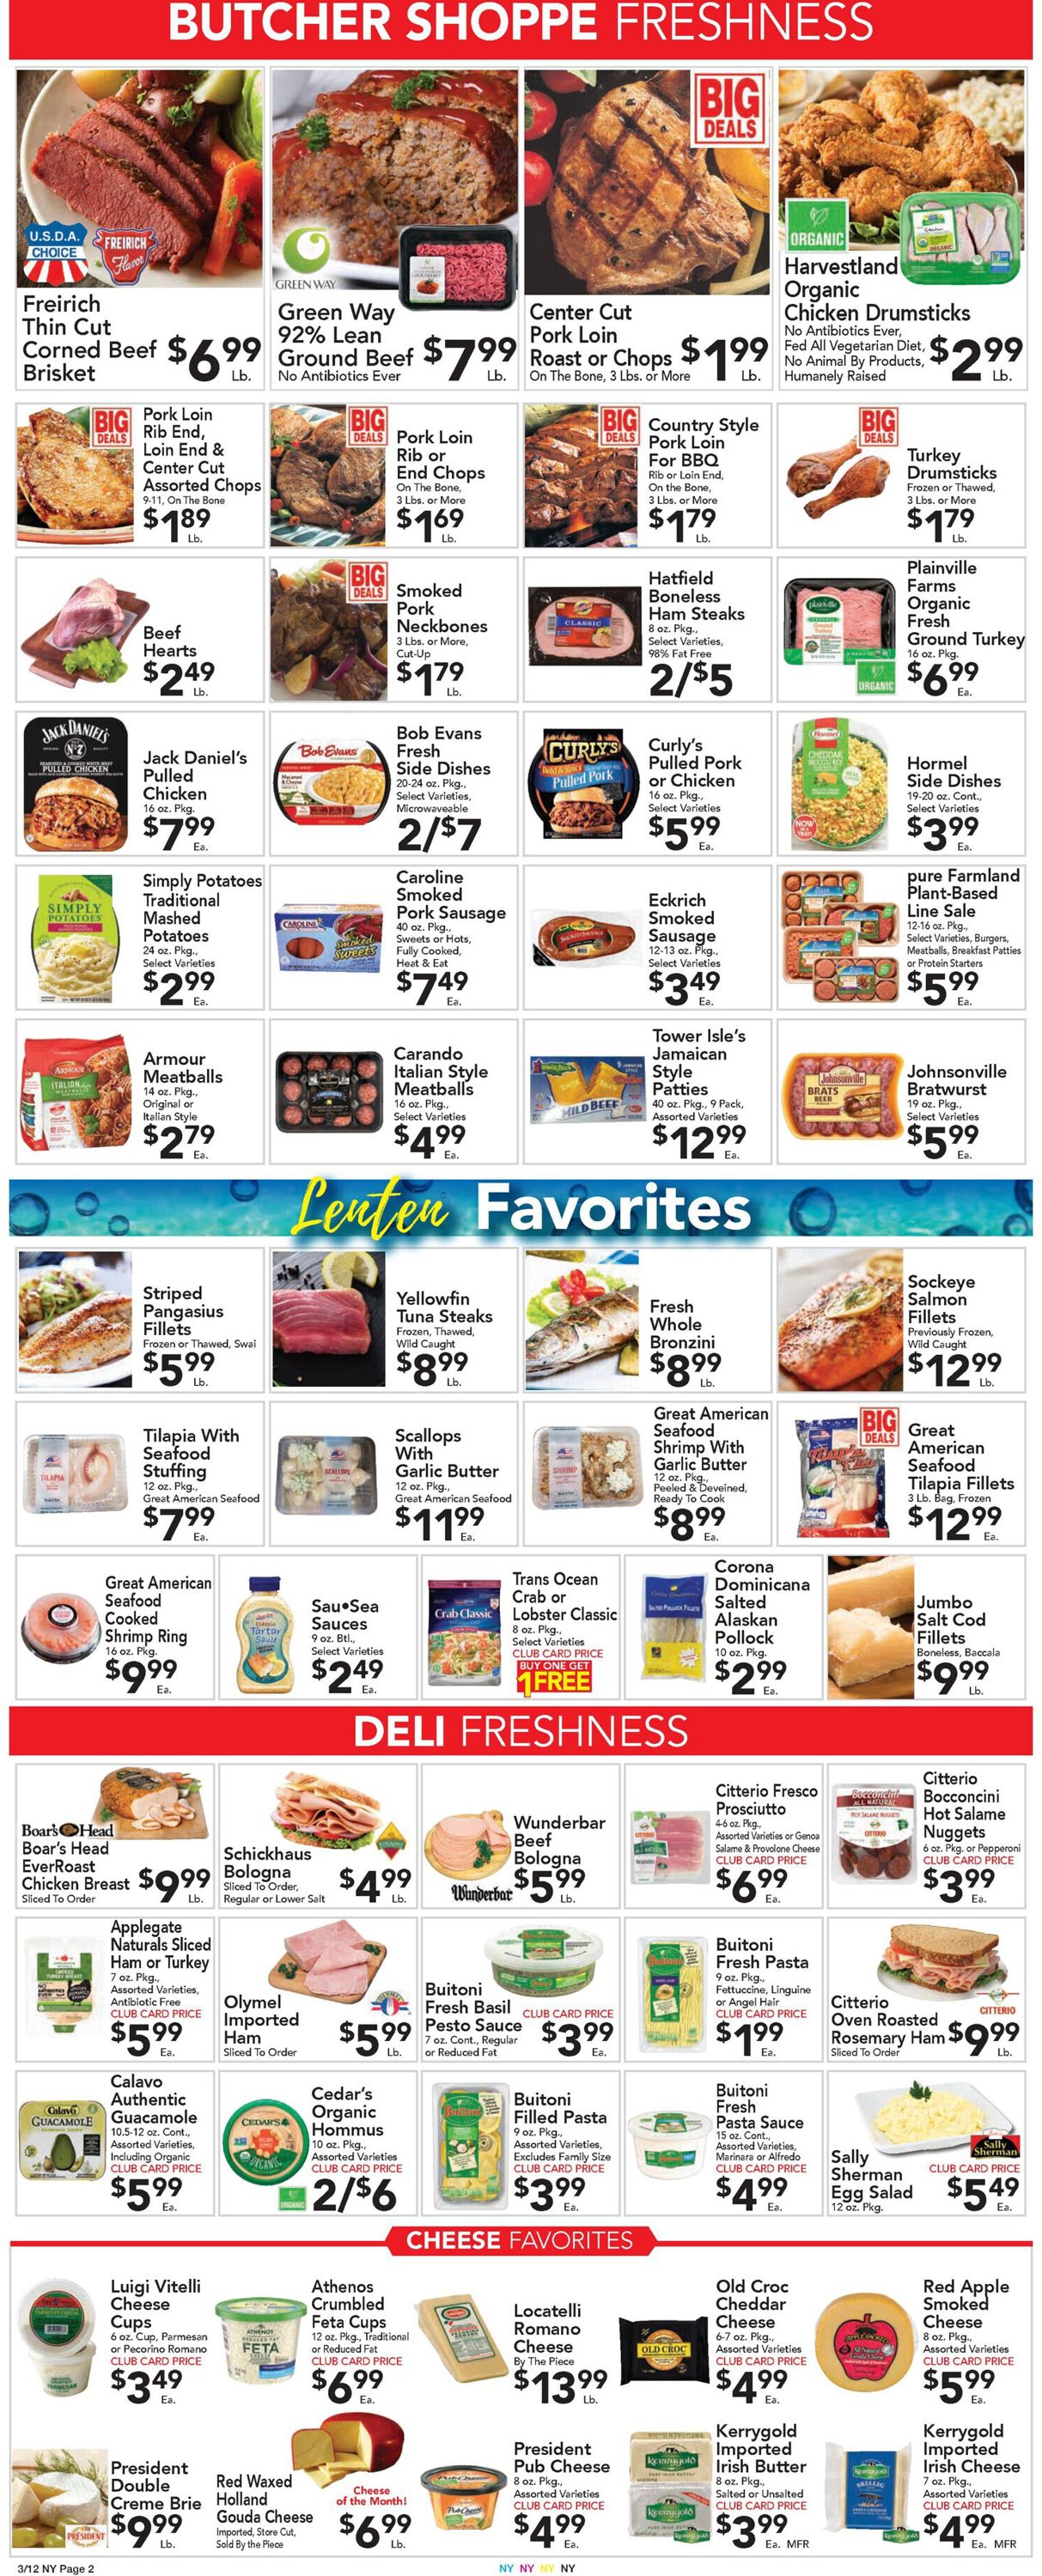 Catalogue Foodtown from 03/12/2021